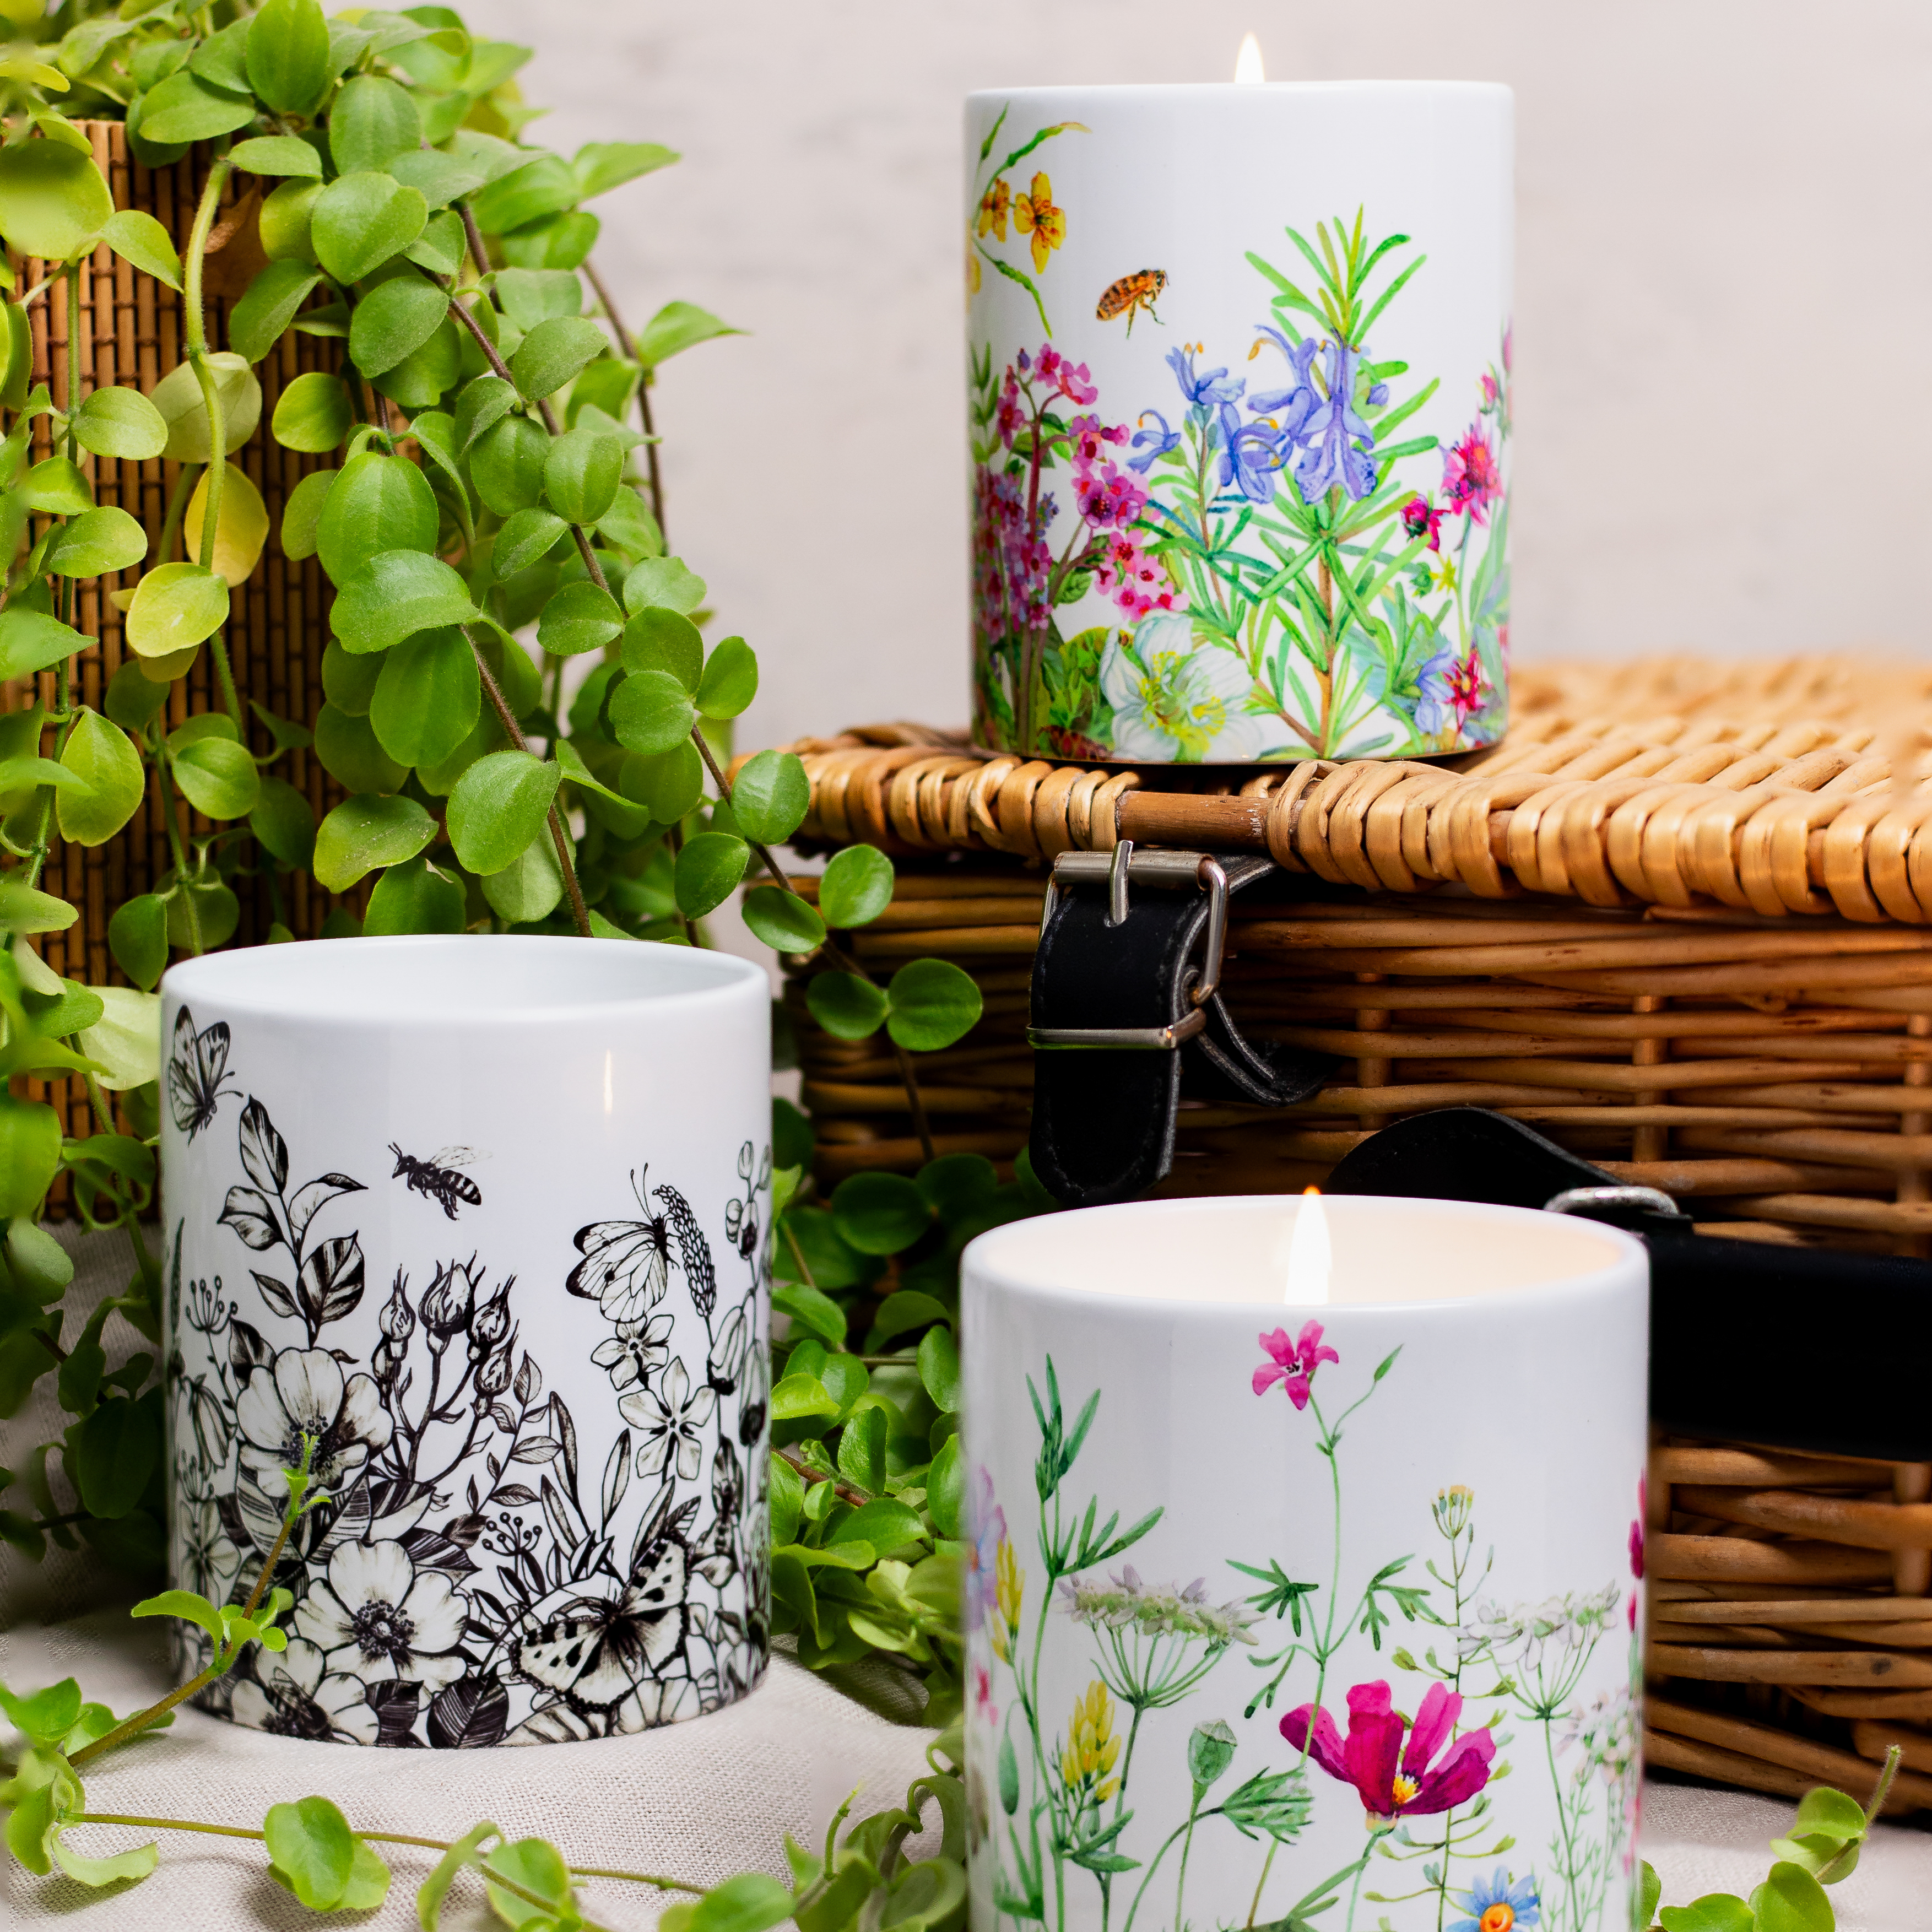 Two Spring Designed Candles. Featuring wild colorful flowers, greenery, bees and butterflies on the ceramic vessel.